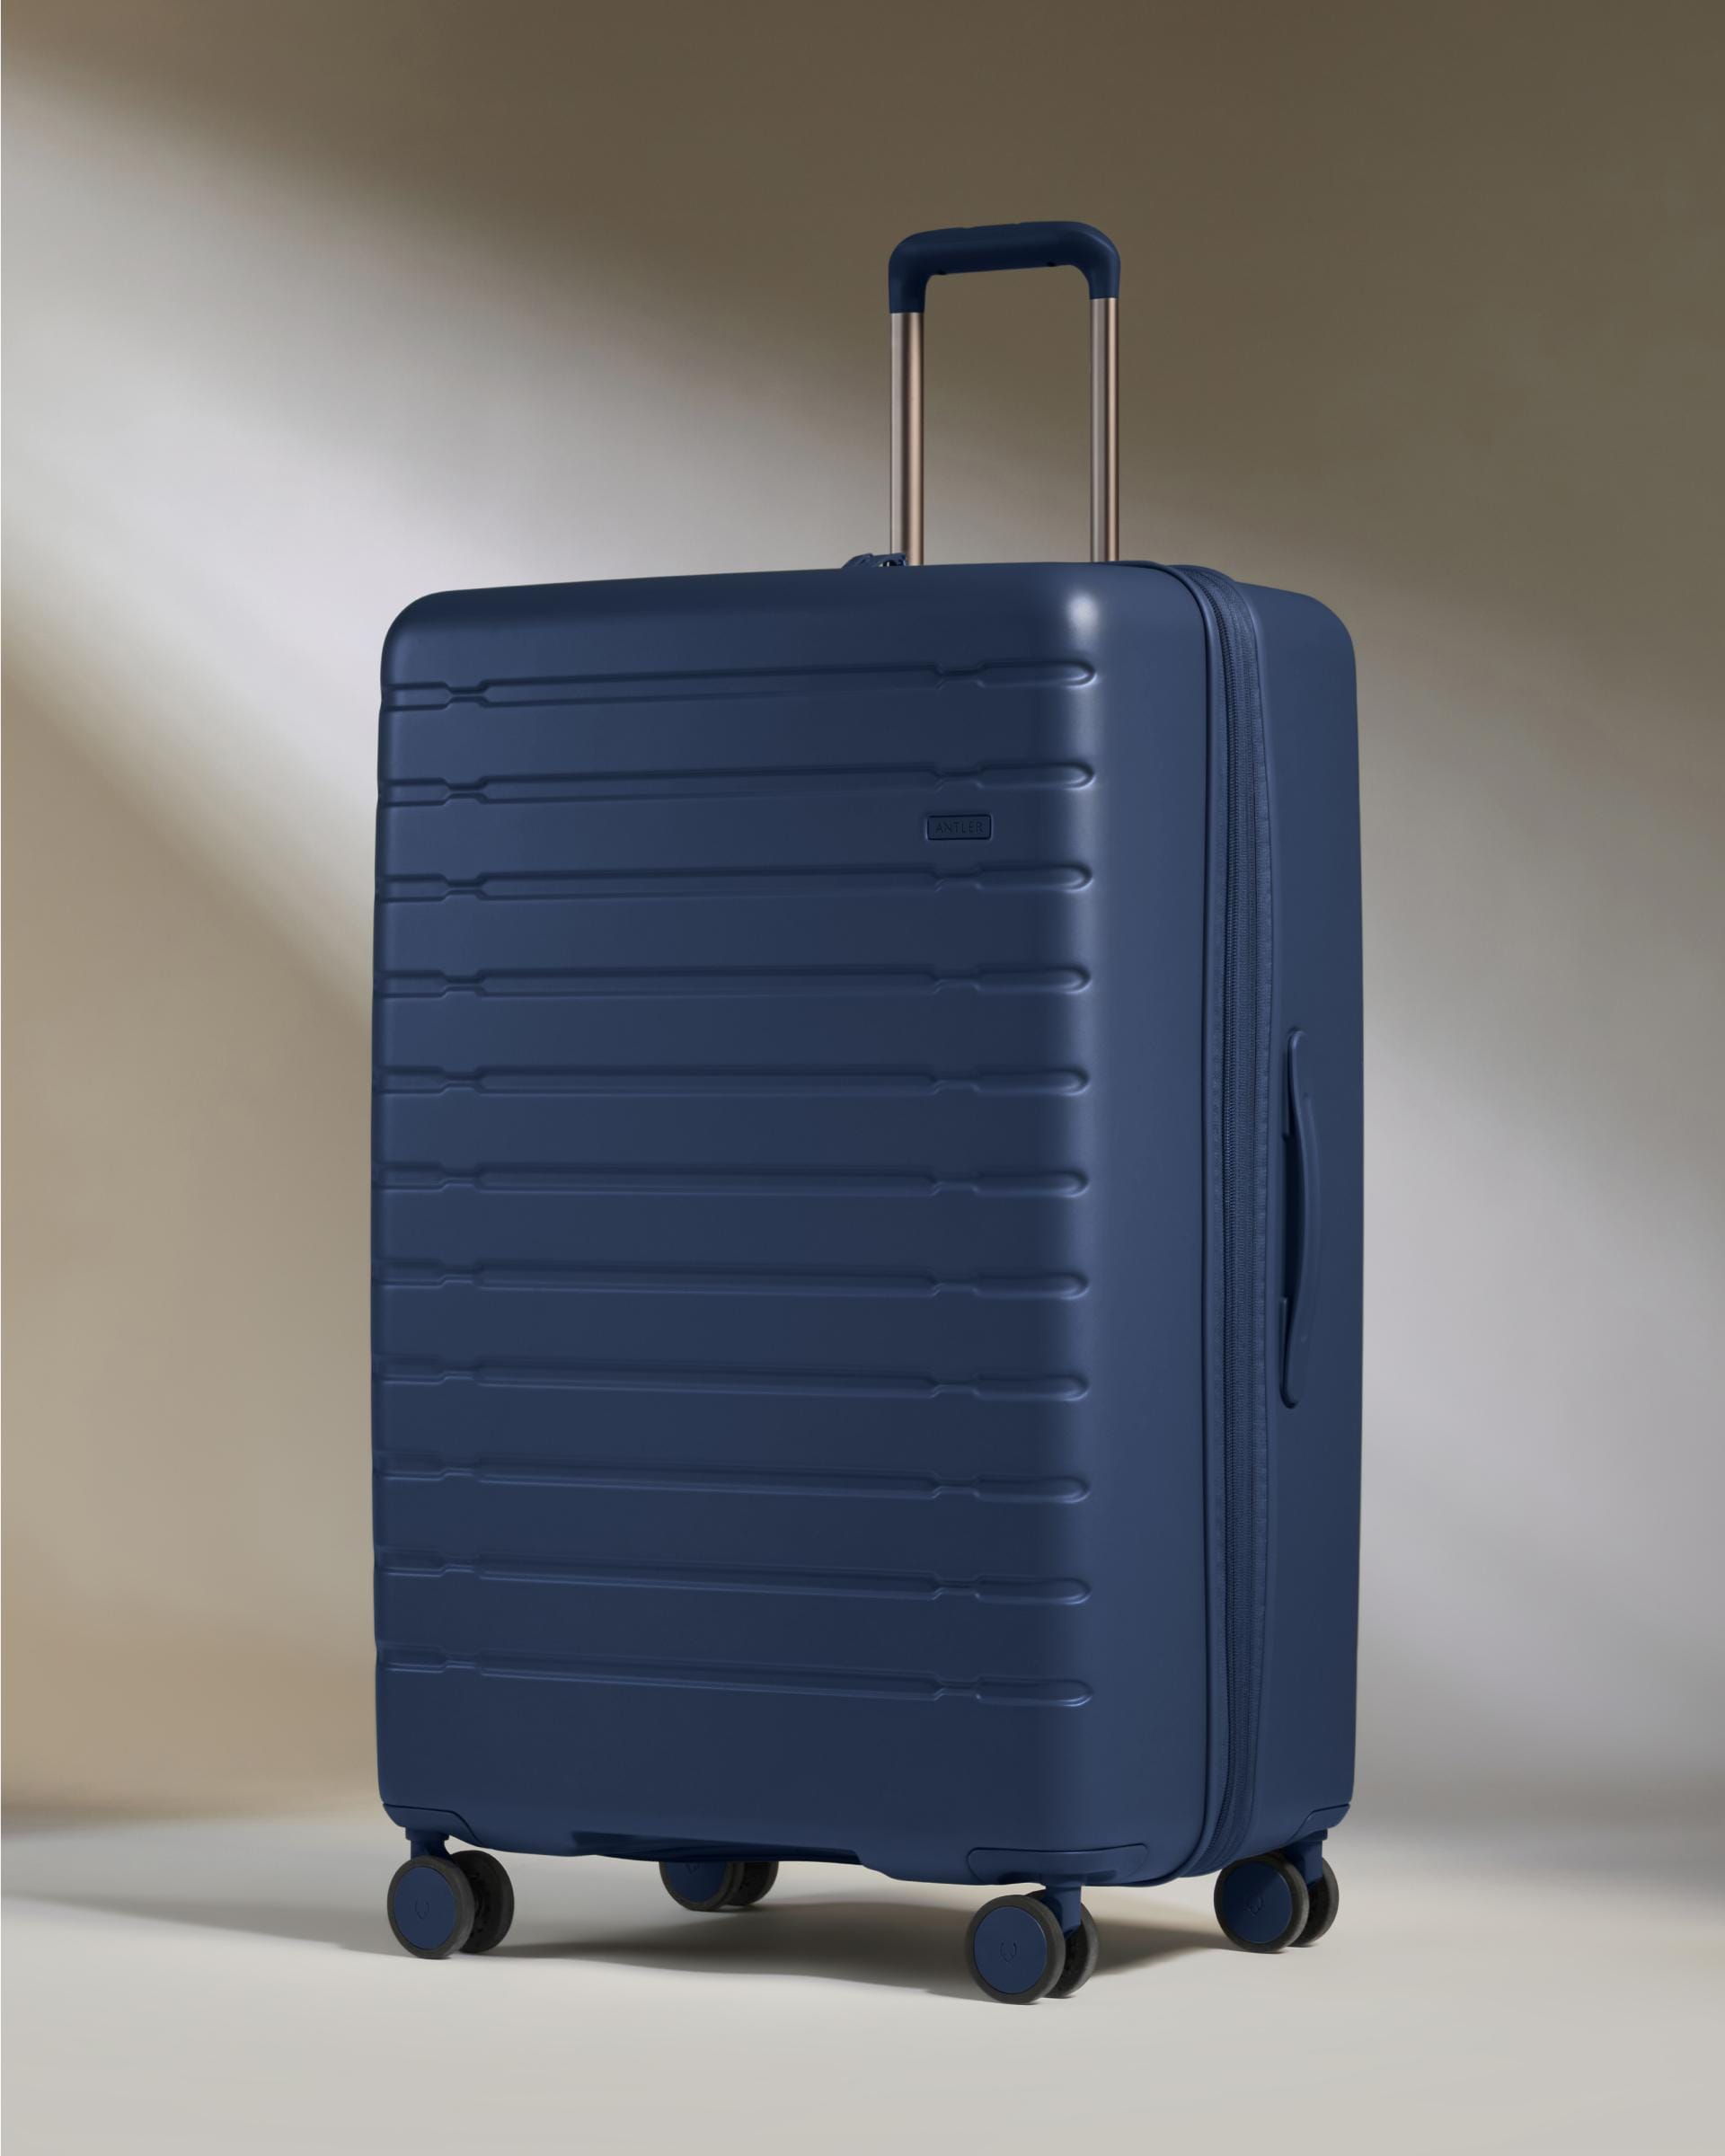 View Antler Stamford 20 Large Suitcase In Dusk Blue Size 345cm x 54cm x 815cm information